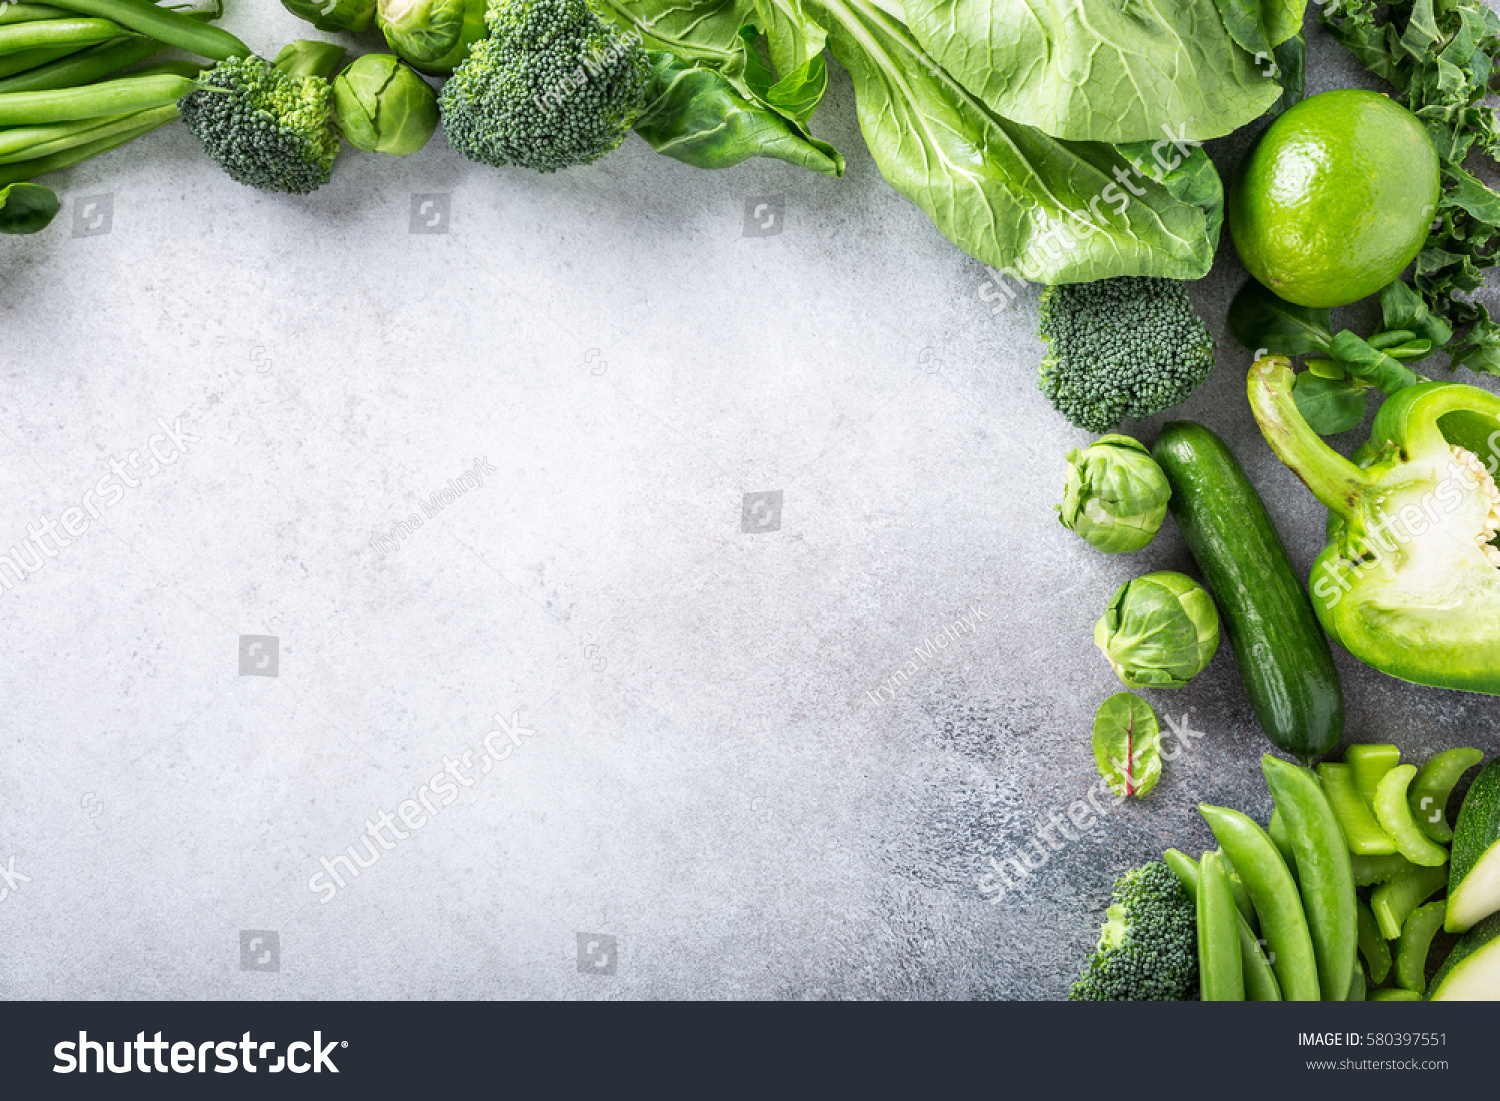 Background with assorted green vegetables, salad, broccoli, cucumber, peas and Brussels sprouts on light gray stone table top. Healthy food concept with copy space. #580397551